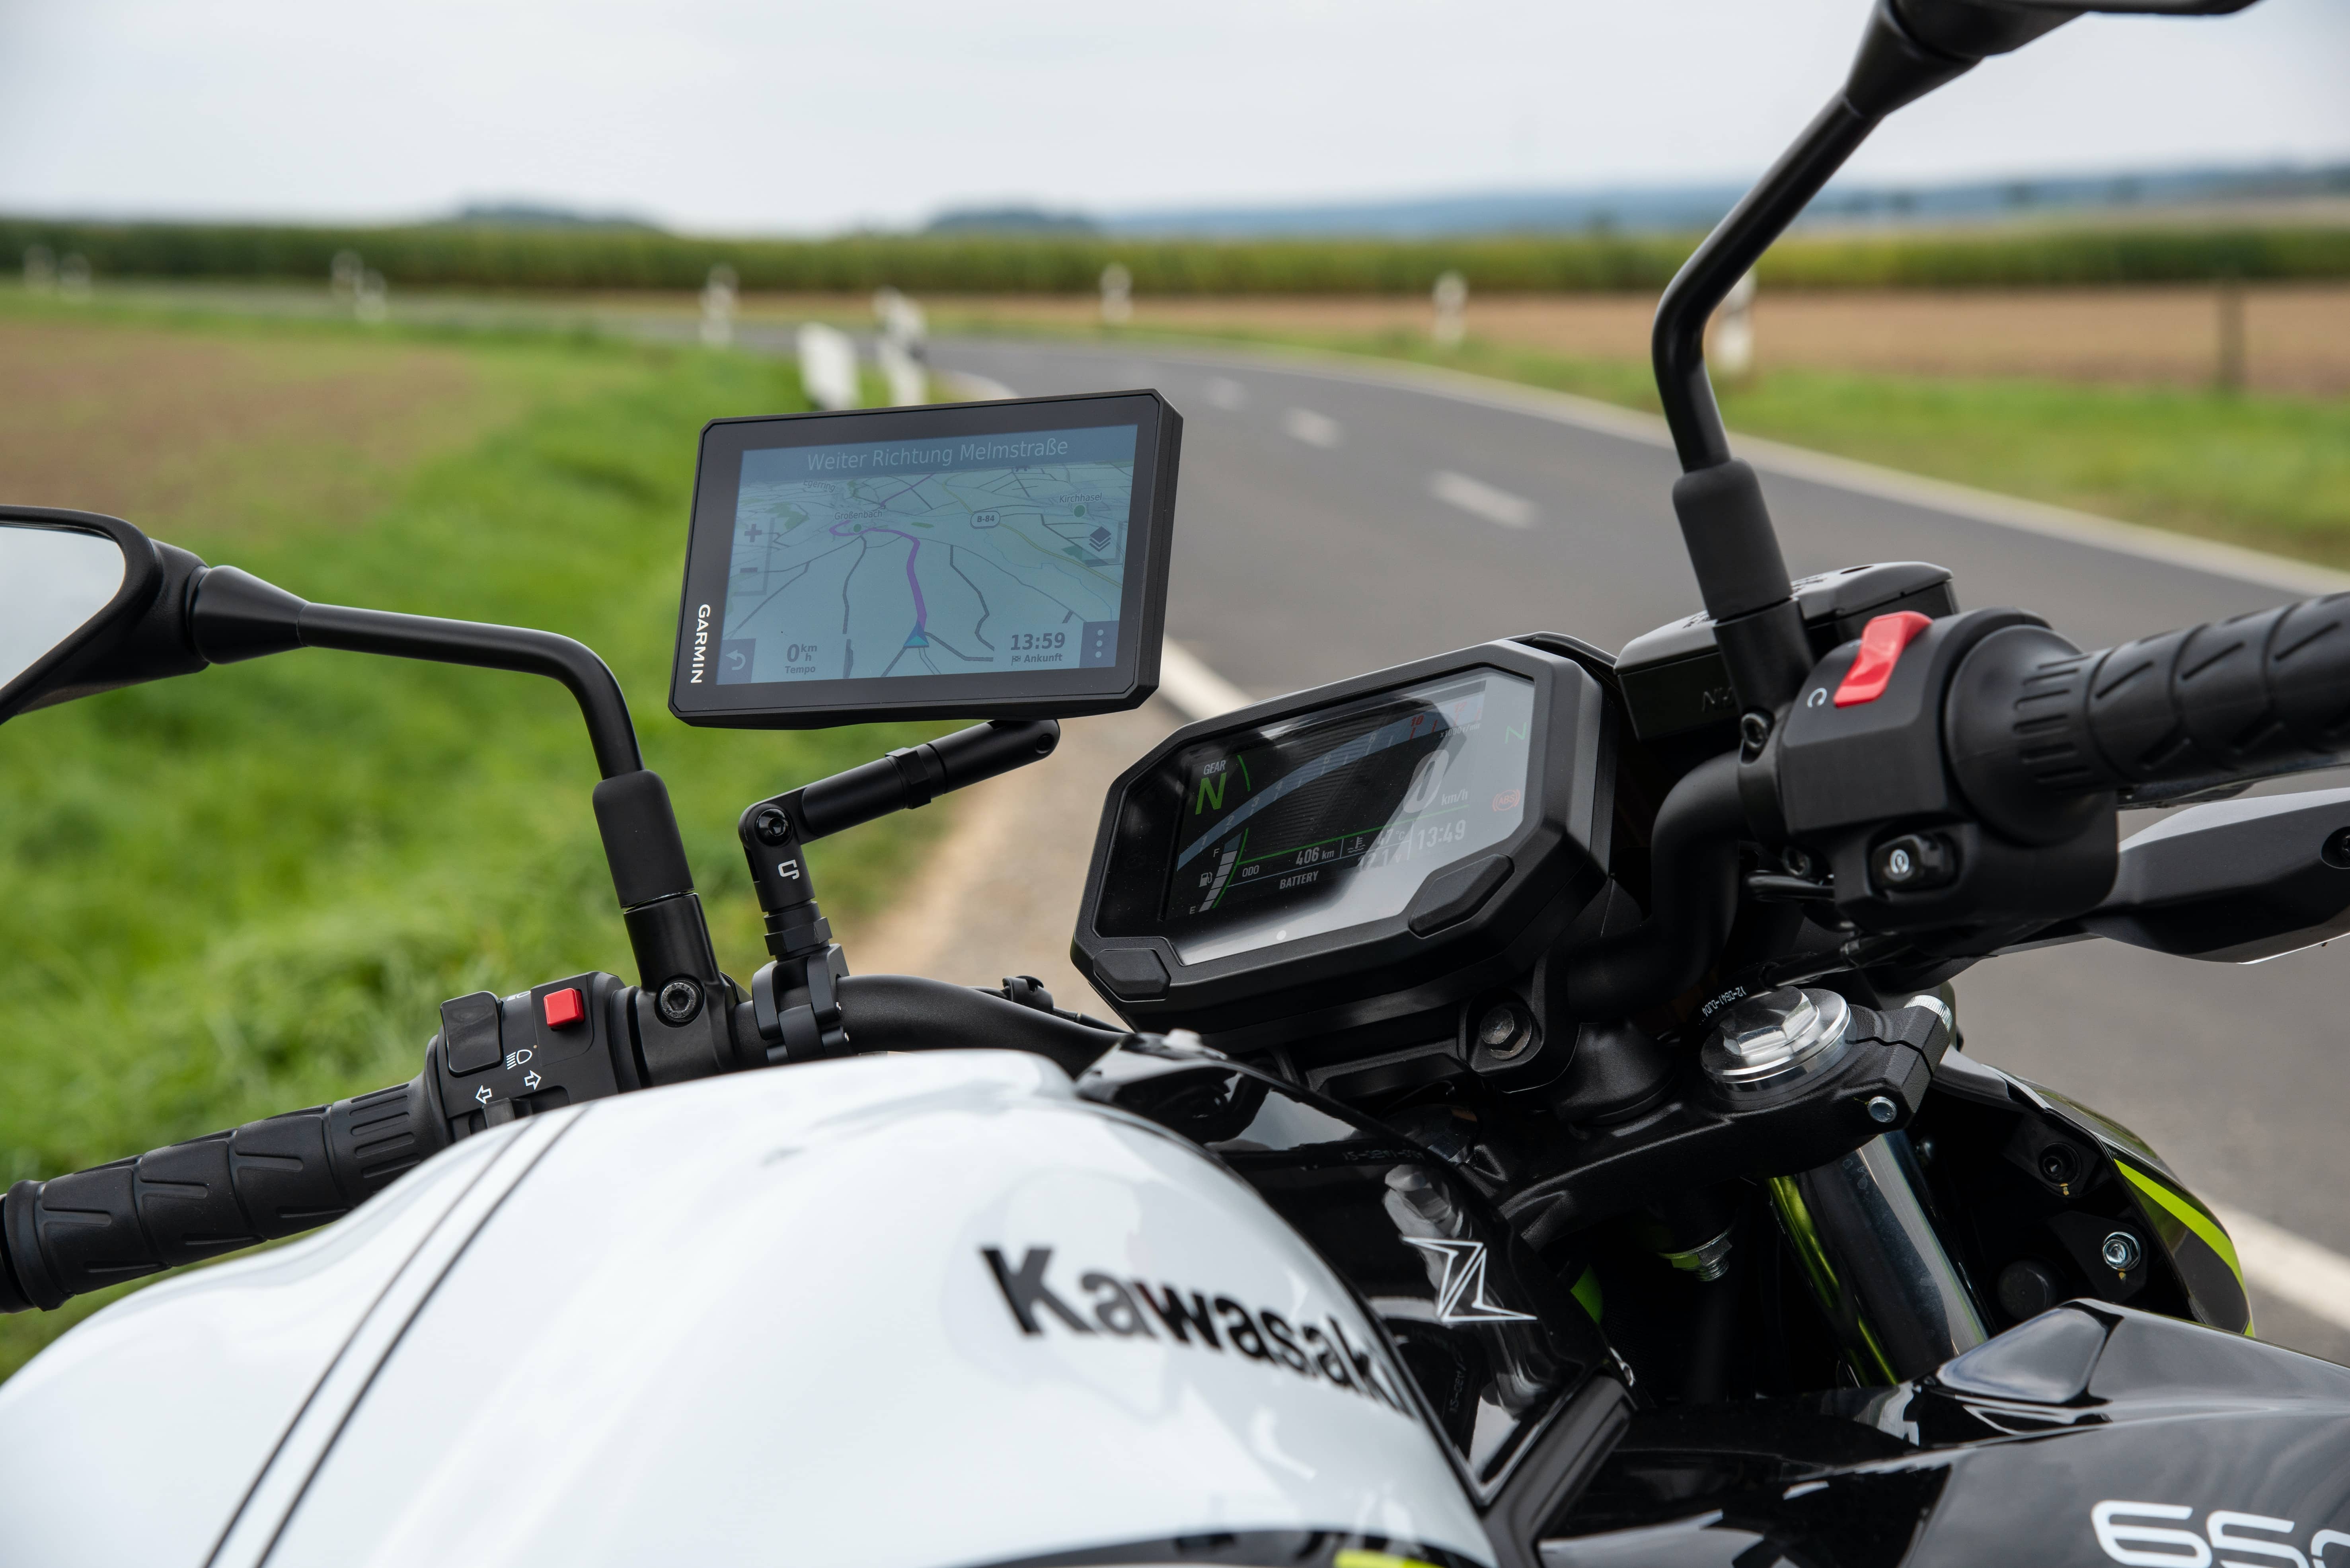 a-motorcycle-with-a-GPS-device